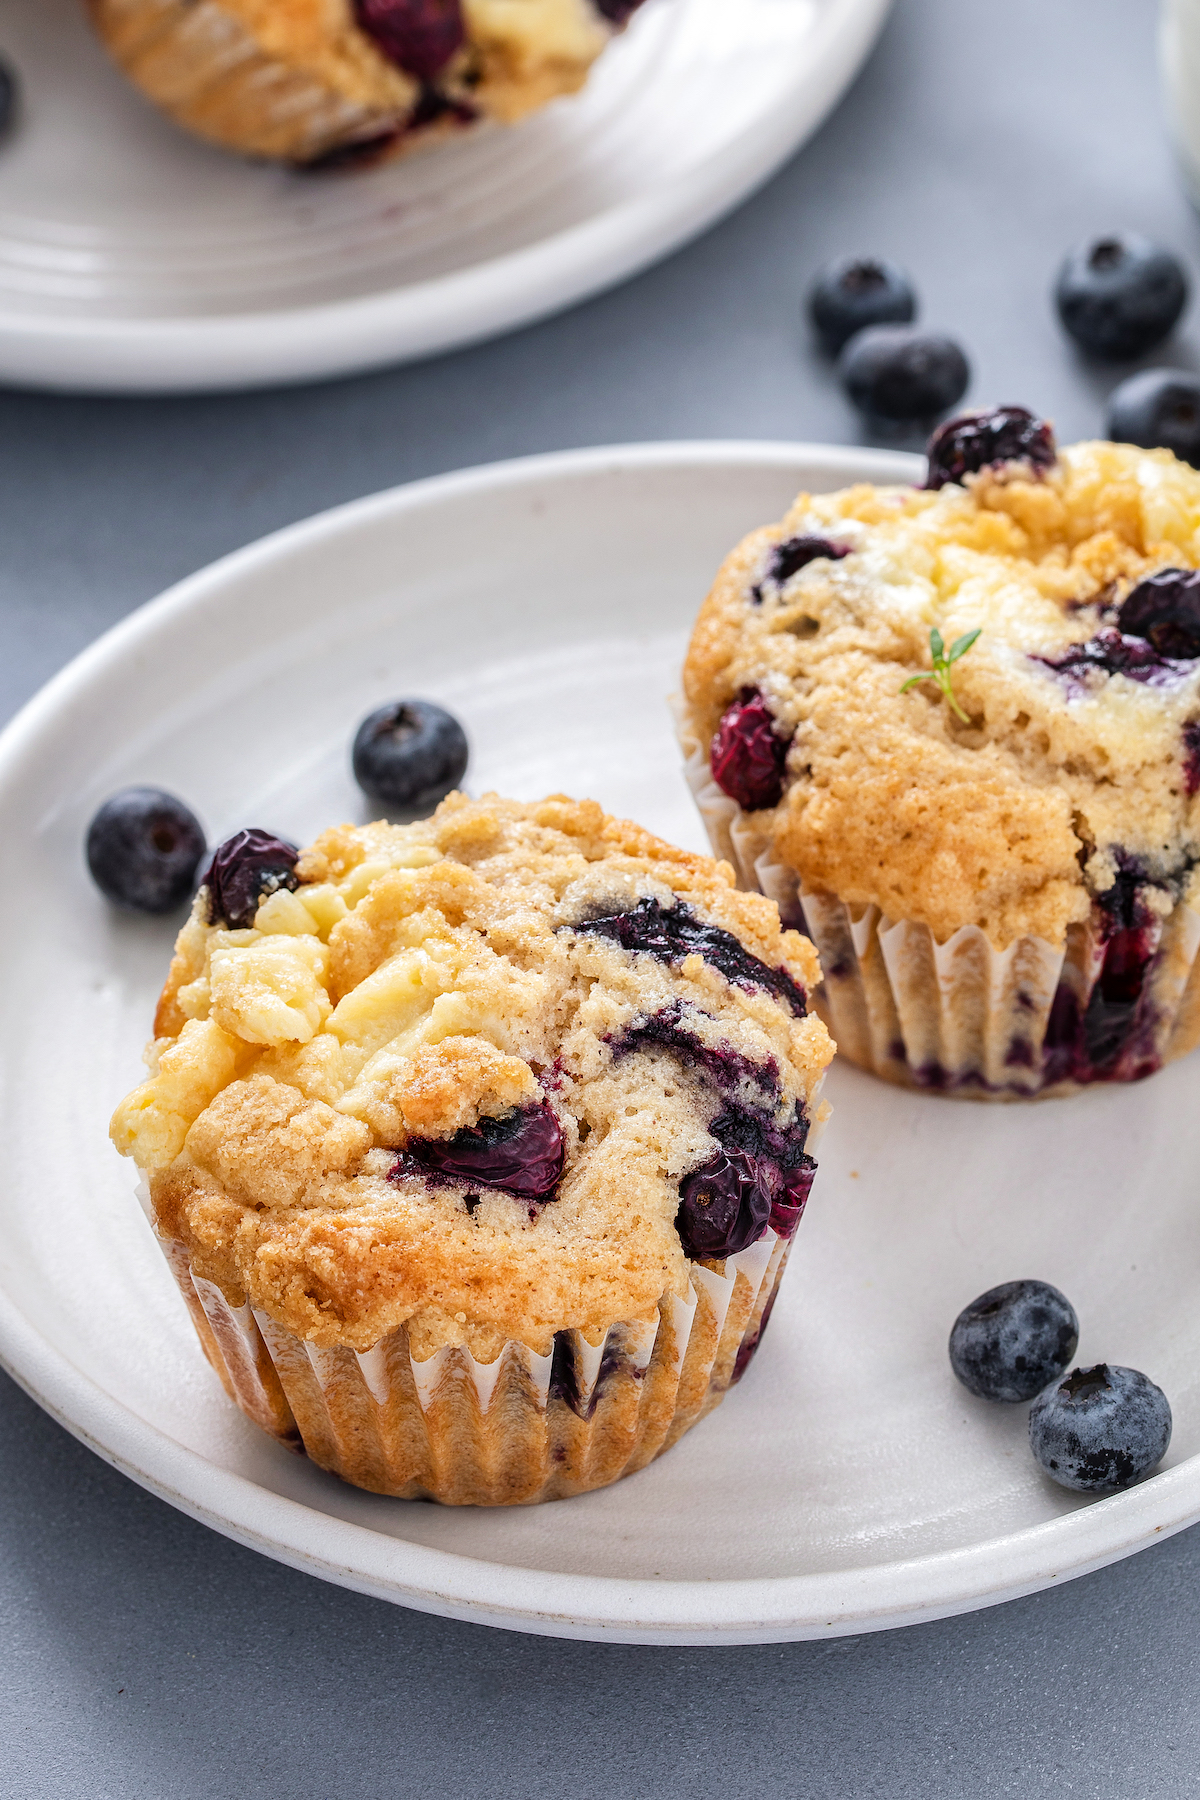 Two blueberry muffins on a small plate.